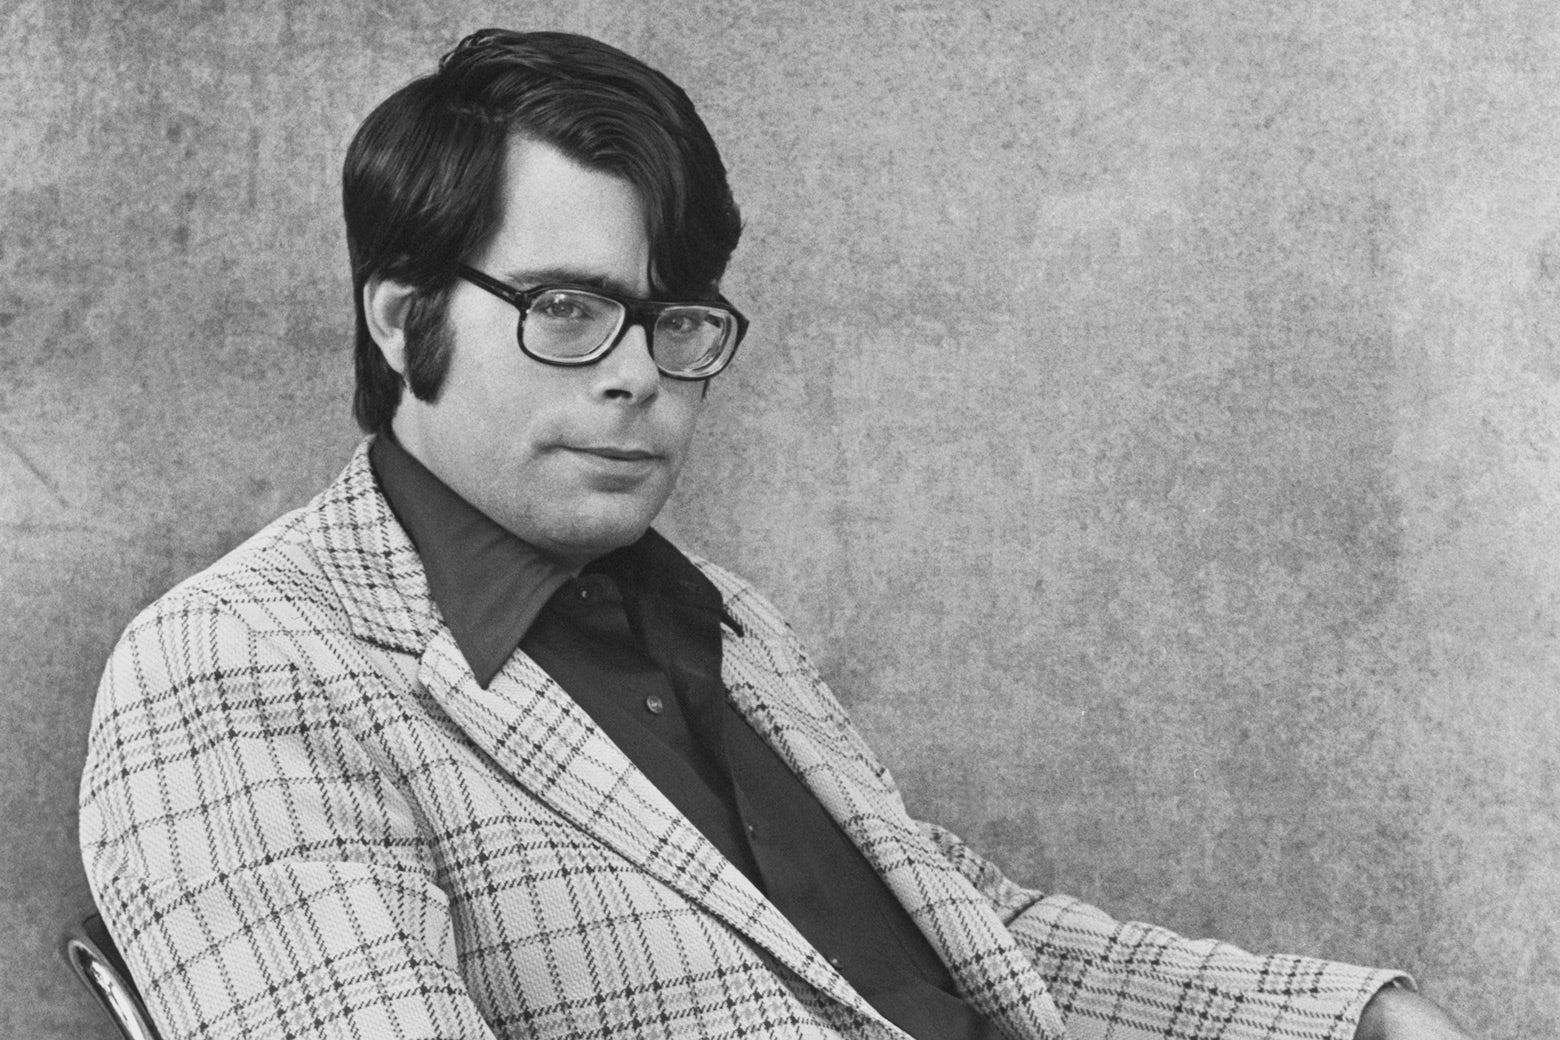 A portrait of American horror writer Stephen King in the mid-1970s.